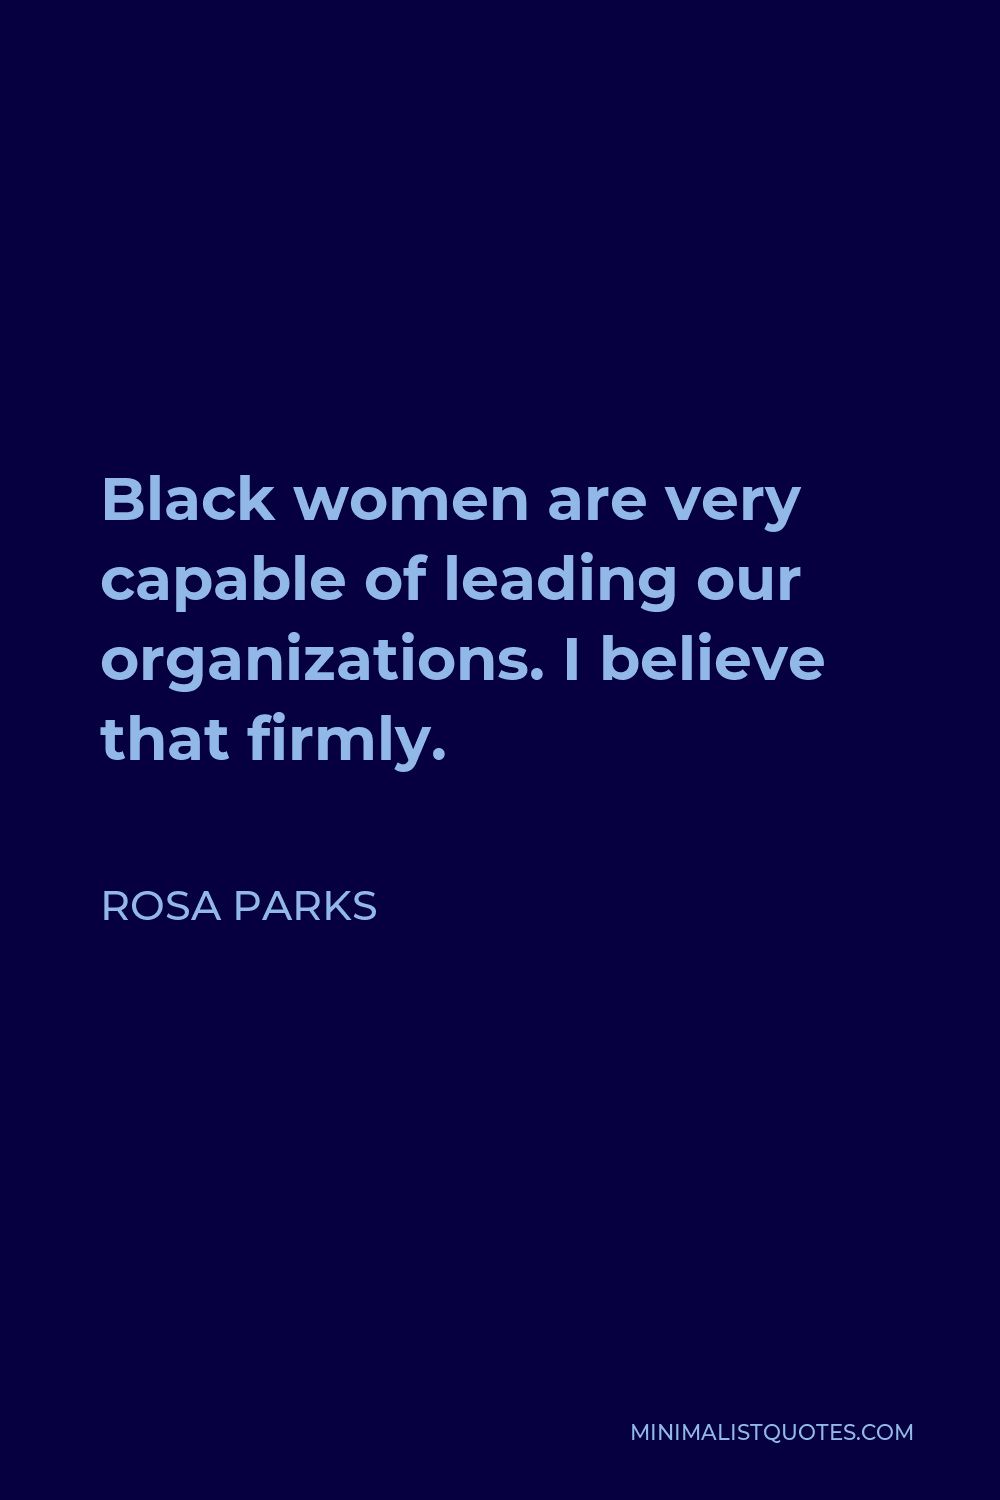 Rosa Parks Quote - Black women are very capable of leading our organizations. I believe that firmly.